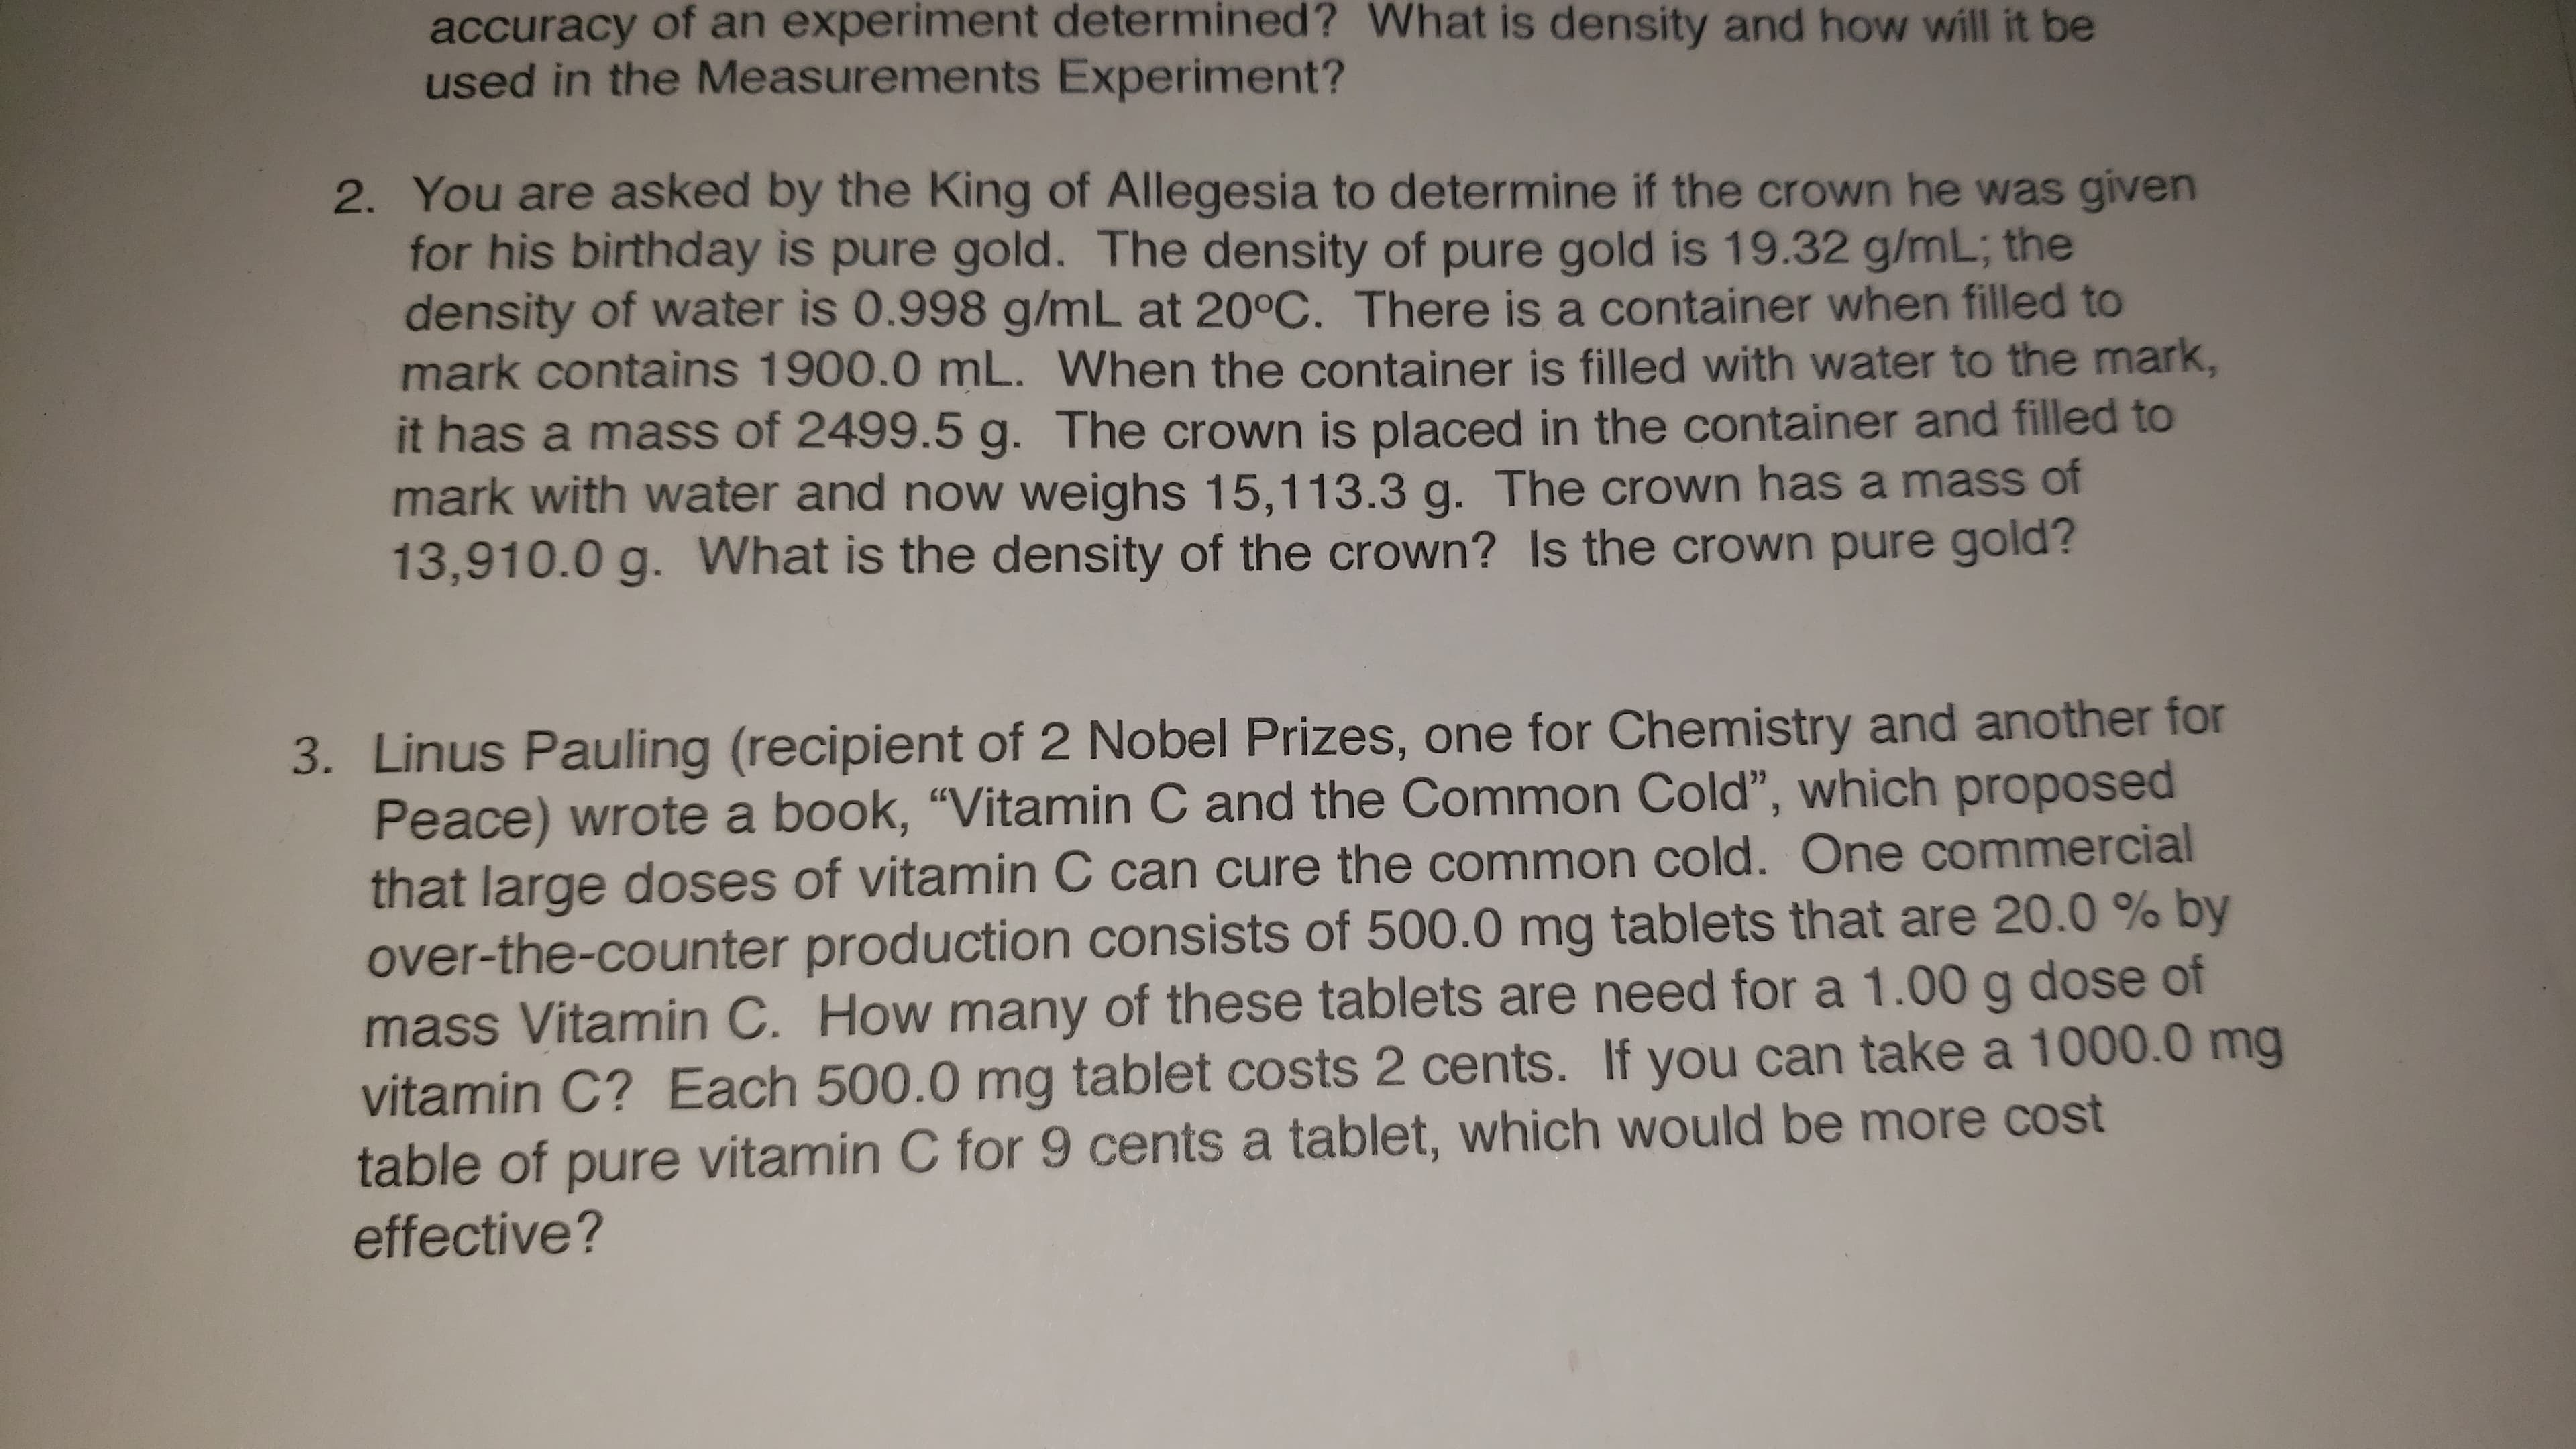 accuracy of an experiment determined? What is density and how will it be
used in the Measurements Experiment?
2. You are asked by the King of Allegesia to determine if the crown he was given
for his birthday is pure gold. The density of pure gold is 19.32 g/mL; the
density of water is 0.998 g/mL at 20°C. There is a container when filled to
mark contains 1900.0 mL. When the container is filled with water to the mark,
it has a mass of 2499.5 g. The crown is placed in the container and filled to
mark with water and now weighs 15,113.3 g. The crown has a mass of
13,910.0 g. What is the density of the crown? Is the crown pure gold?
3. Linus Pauling (recipient of 2 Nobel Prizes, one for Chemistry and another for
Peace) wrote a book, '"Vitamin C and the Common Cold", which proposed
that large doses of vitamin C can cure the common cold. One commercial
over-the-counter production consists of 500.0 mg tablets that are 20.0 % by
mass Vitamin C. How many of these tablets are need for a 1.00 g dose of
vitamin C? Each 500.0 mg tablet costs 2 cents. If you can take a 1000.0 mg
table of pure vitamin C for 9 cents a tablet, which would be more cost
effective?
